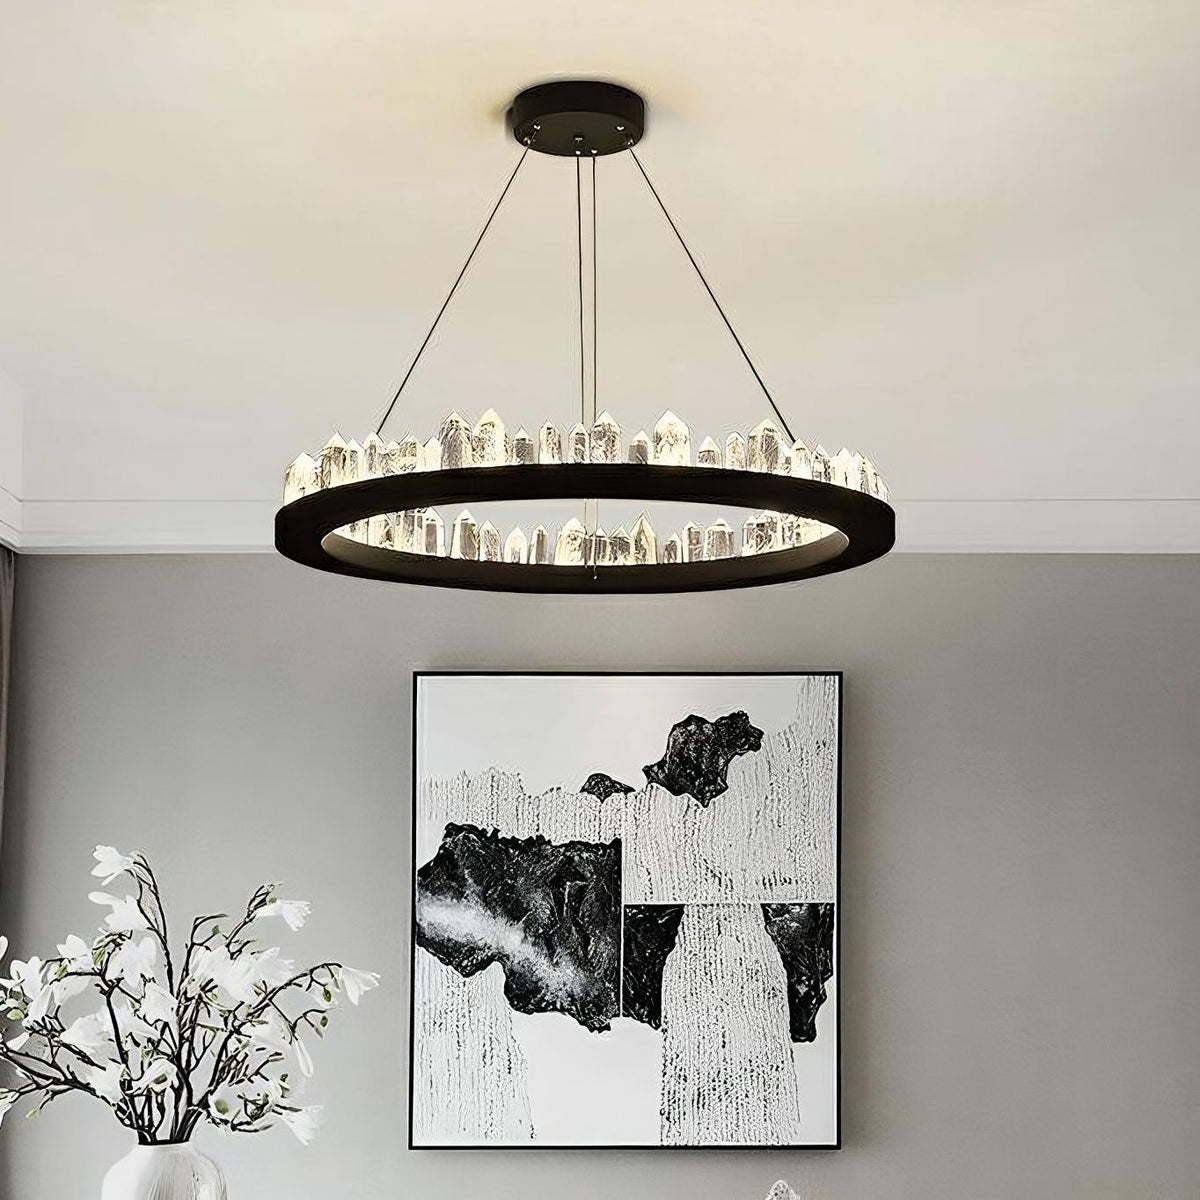 A Villa Collection Crystal Wheel Chandelier from Morsale.com hanging above a monochrome abstract painting on a wall, with a vase of white flowers on the left—elegant interior setting.